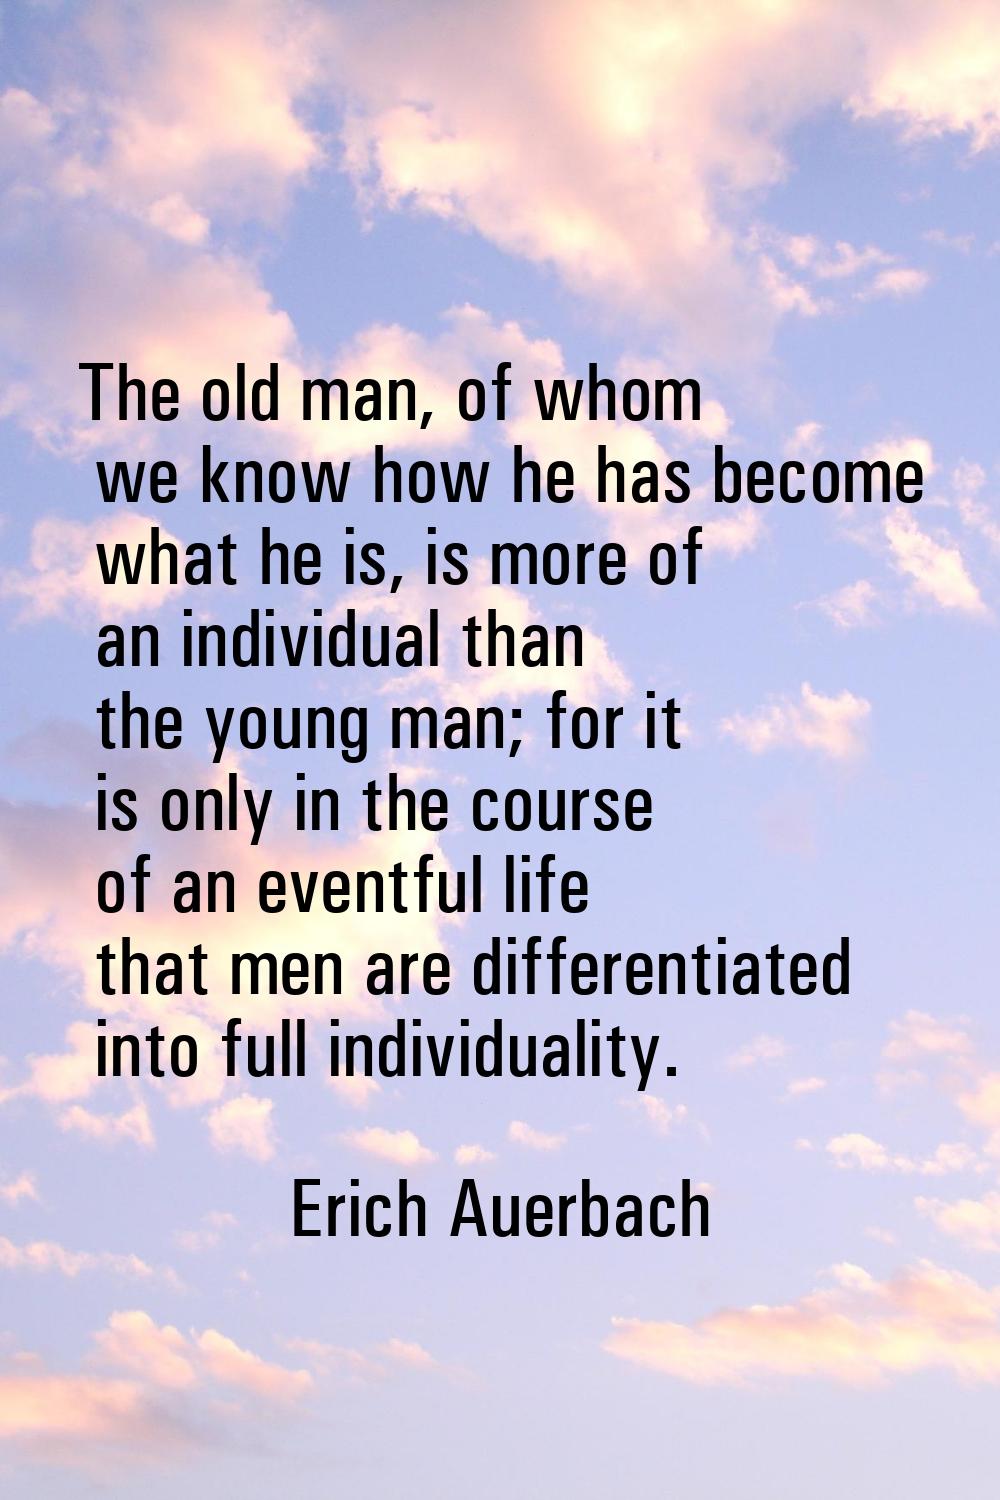 The old man, of whom we know how he has become what he is, is more of an individual than the young 